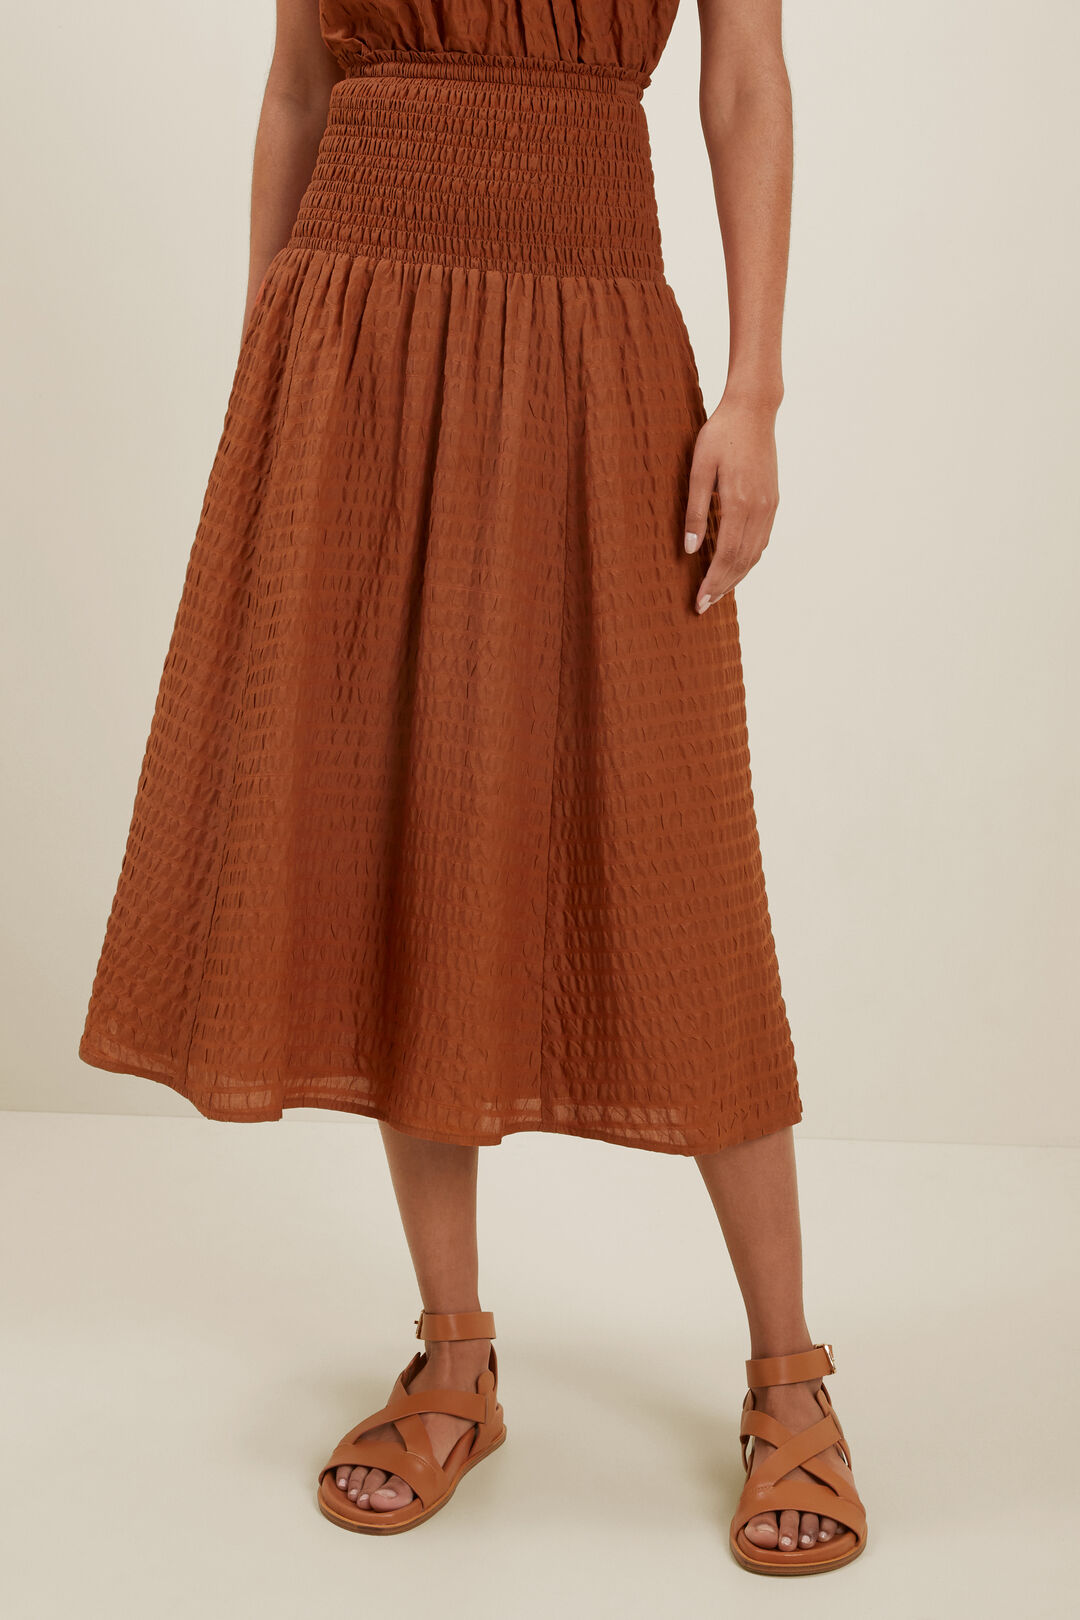 Textured Shirred Skirt  Earth Red  hi-res